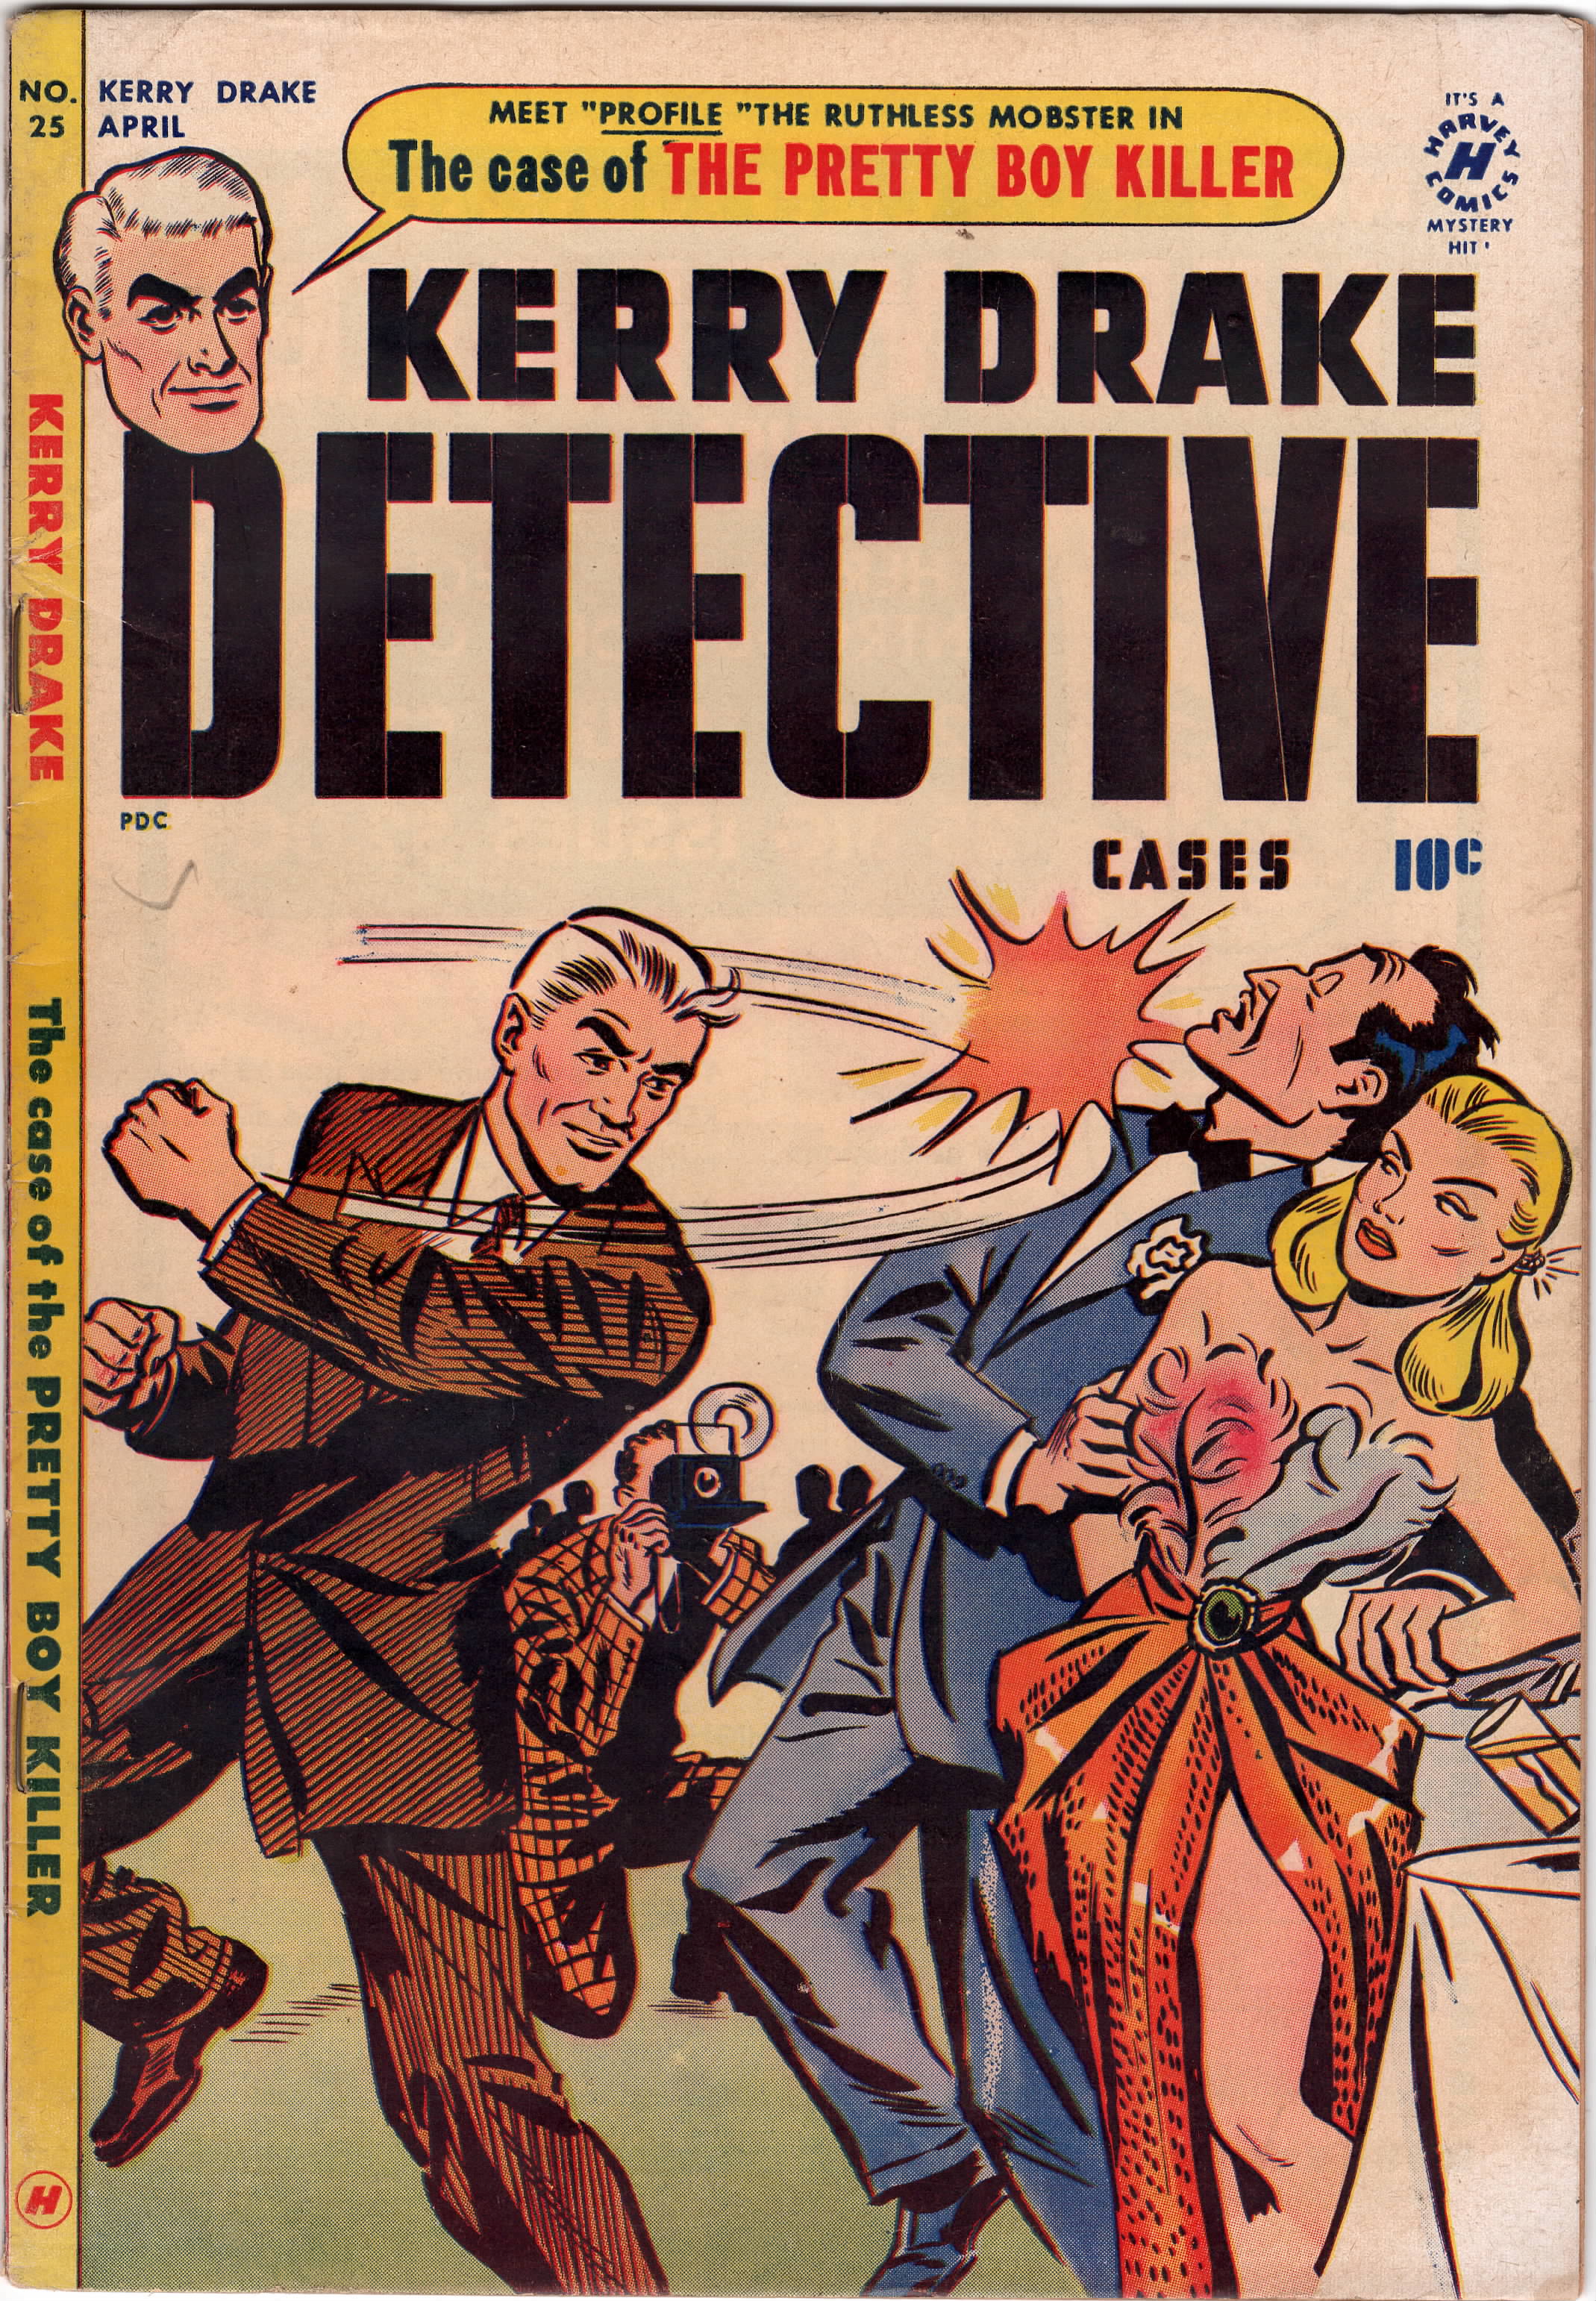 Kerry Drake Detective Cases #25